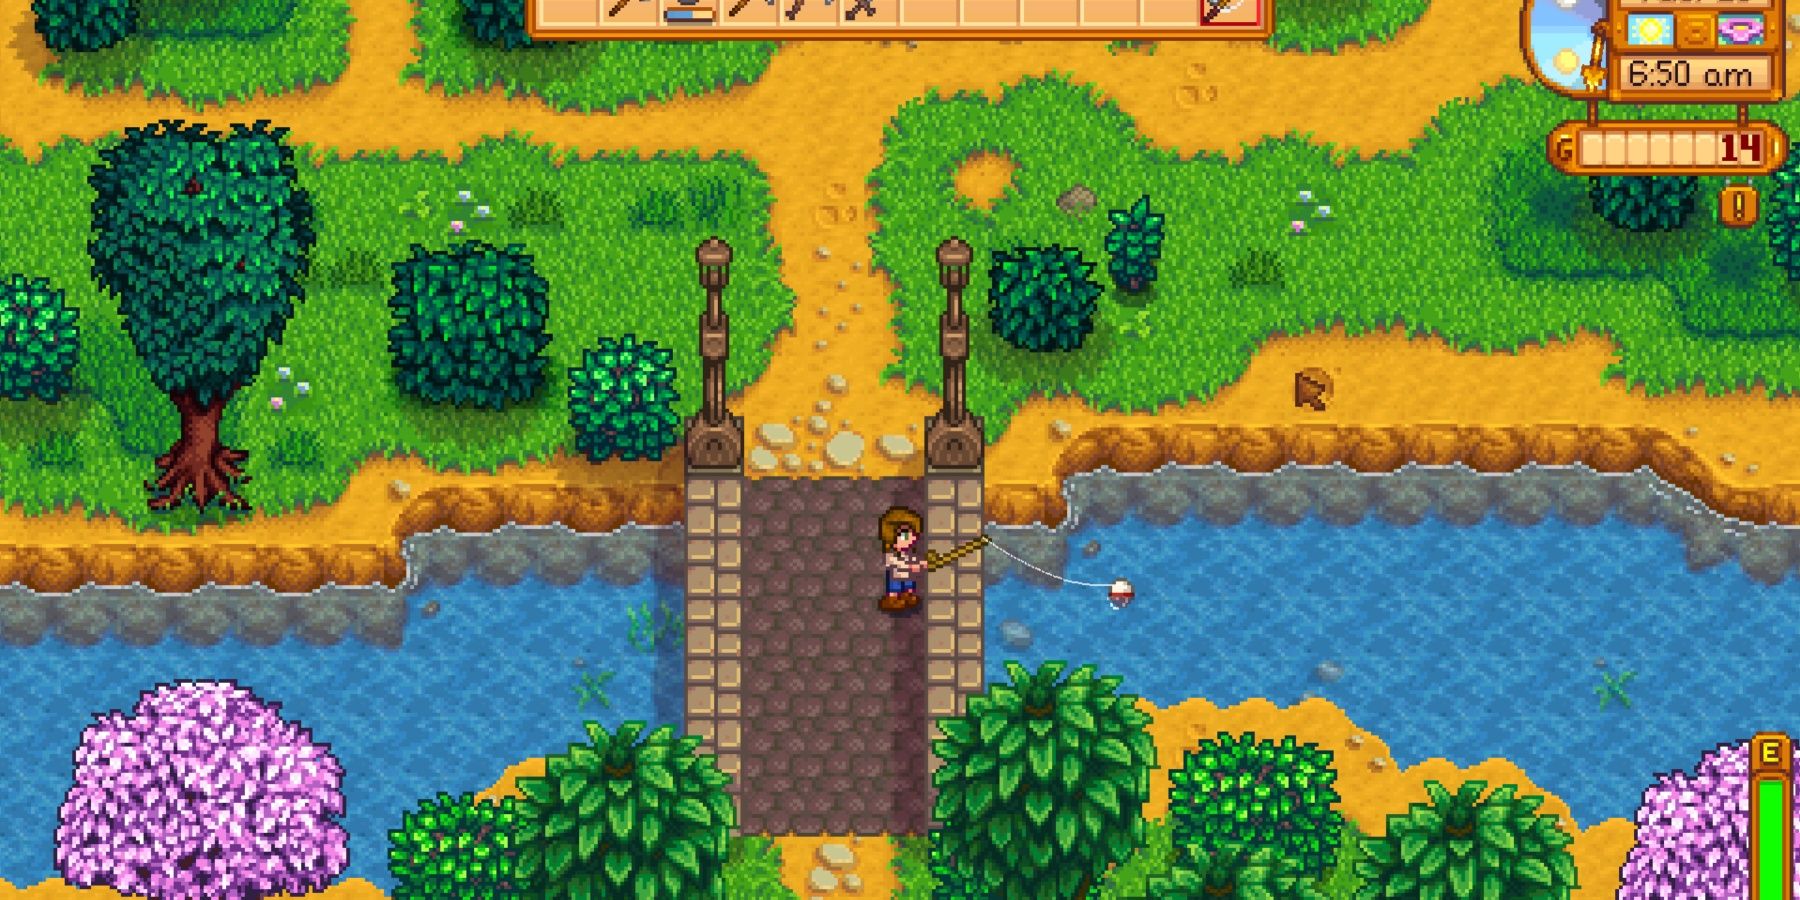 The player standing on the bridge towards the beach fishing in the river